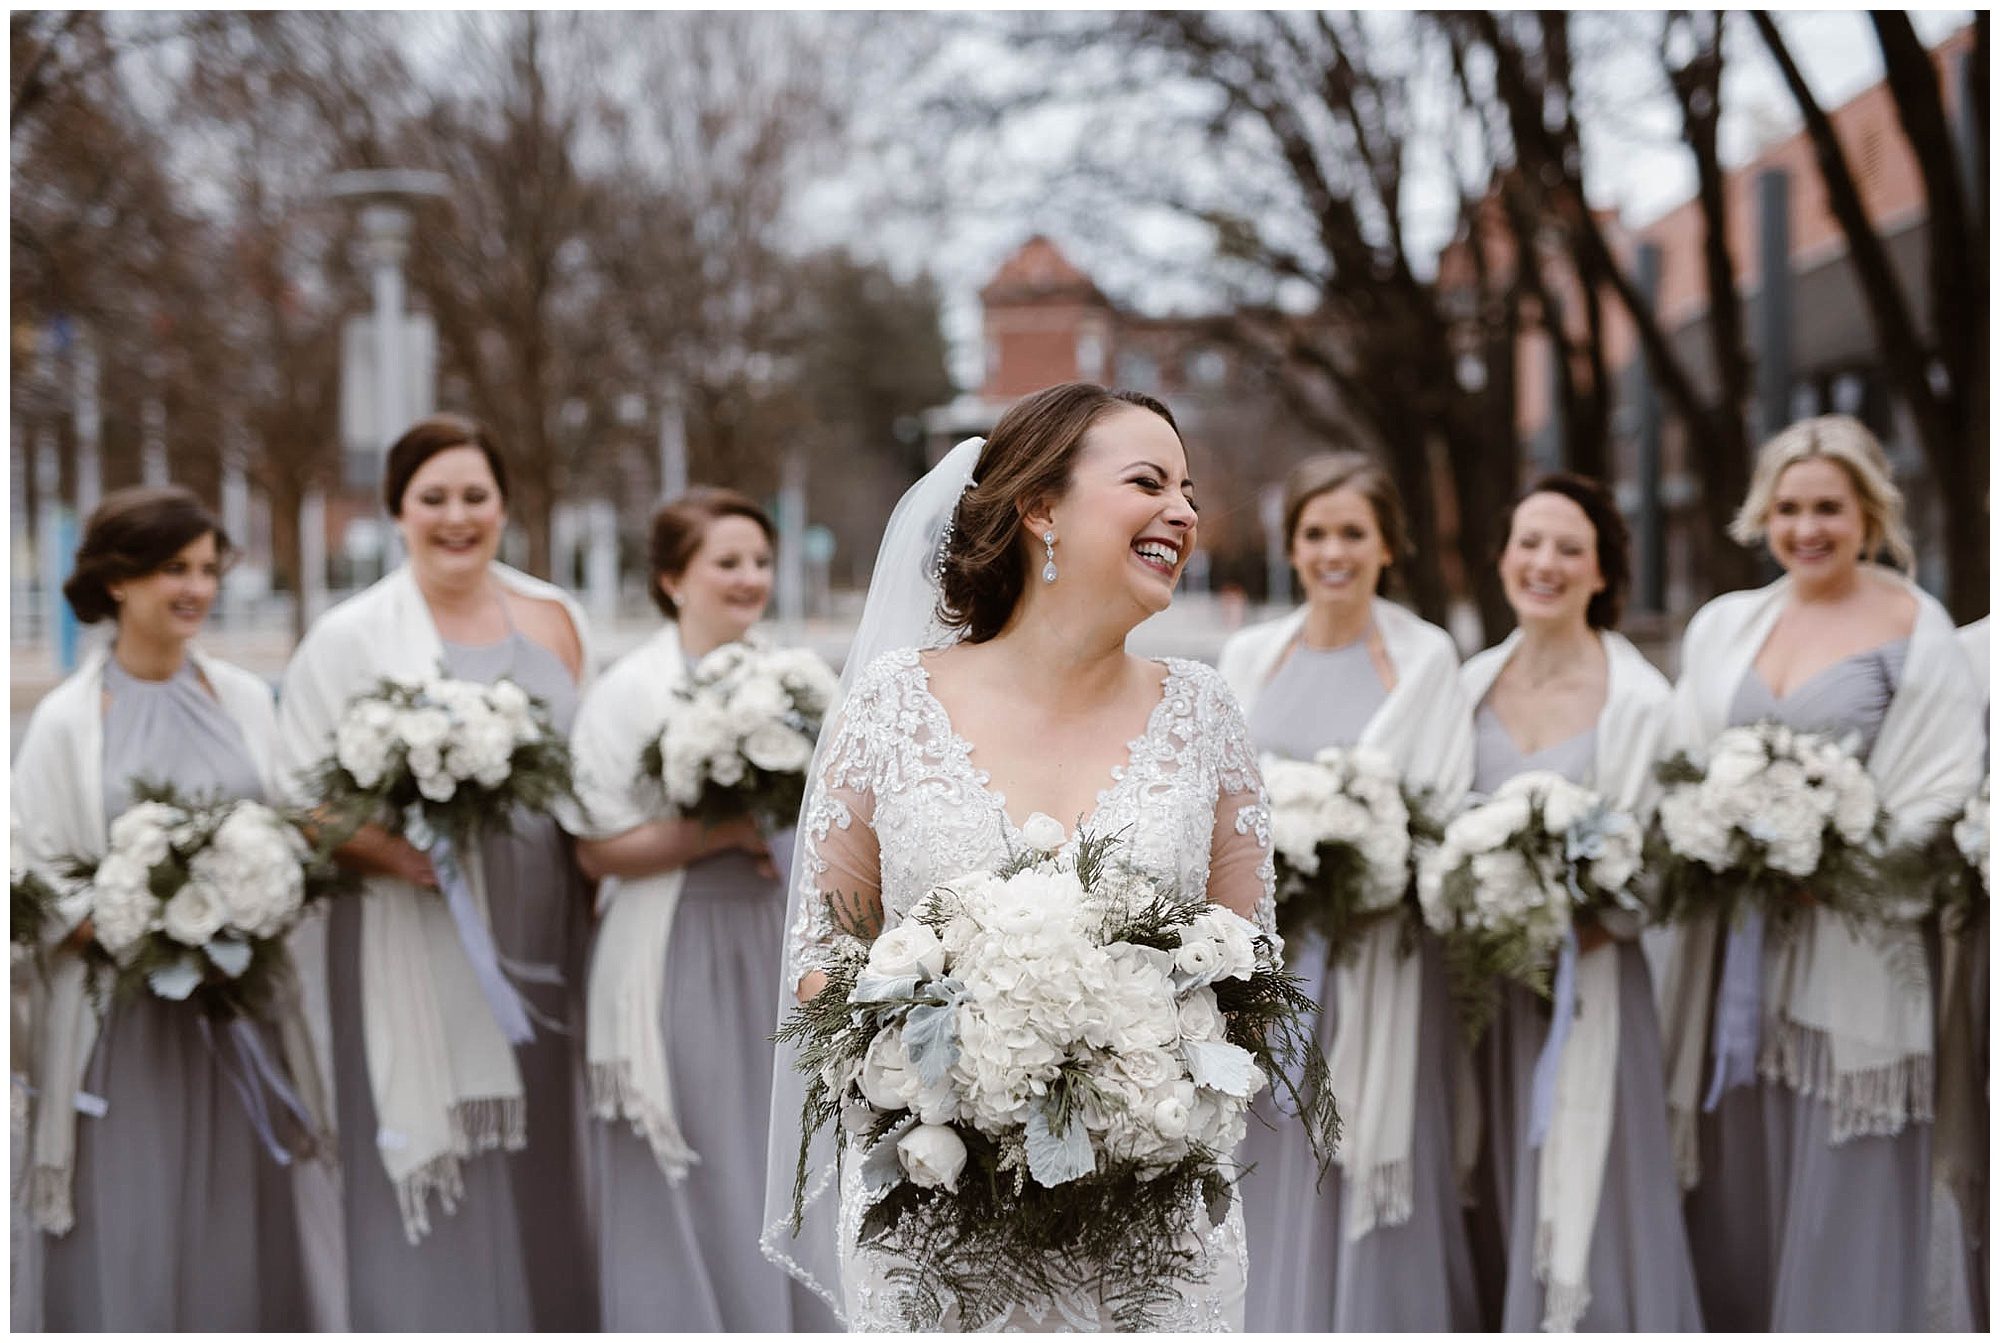 bride laughing with bridesmaids in the background